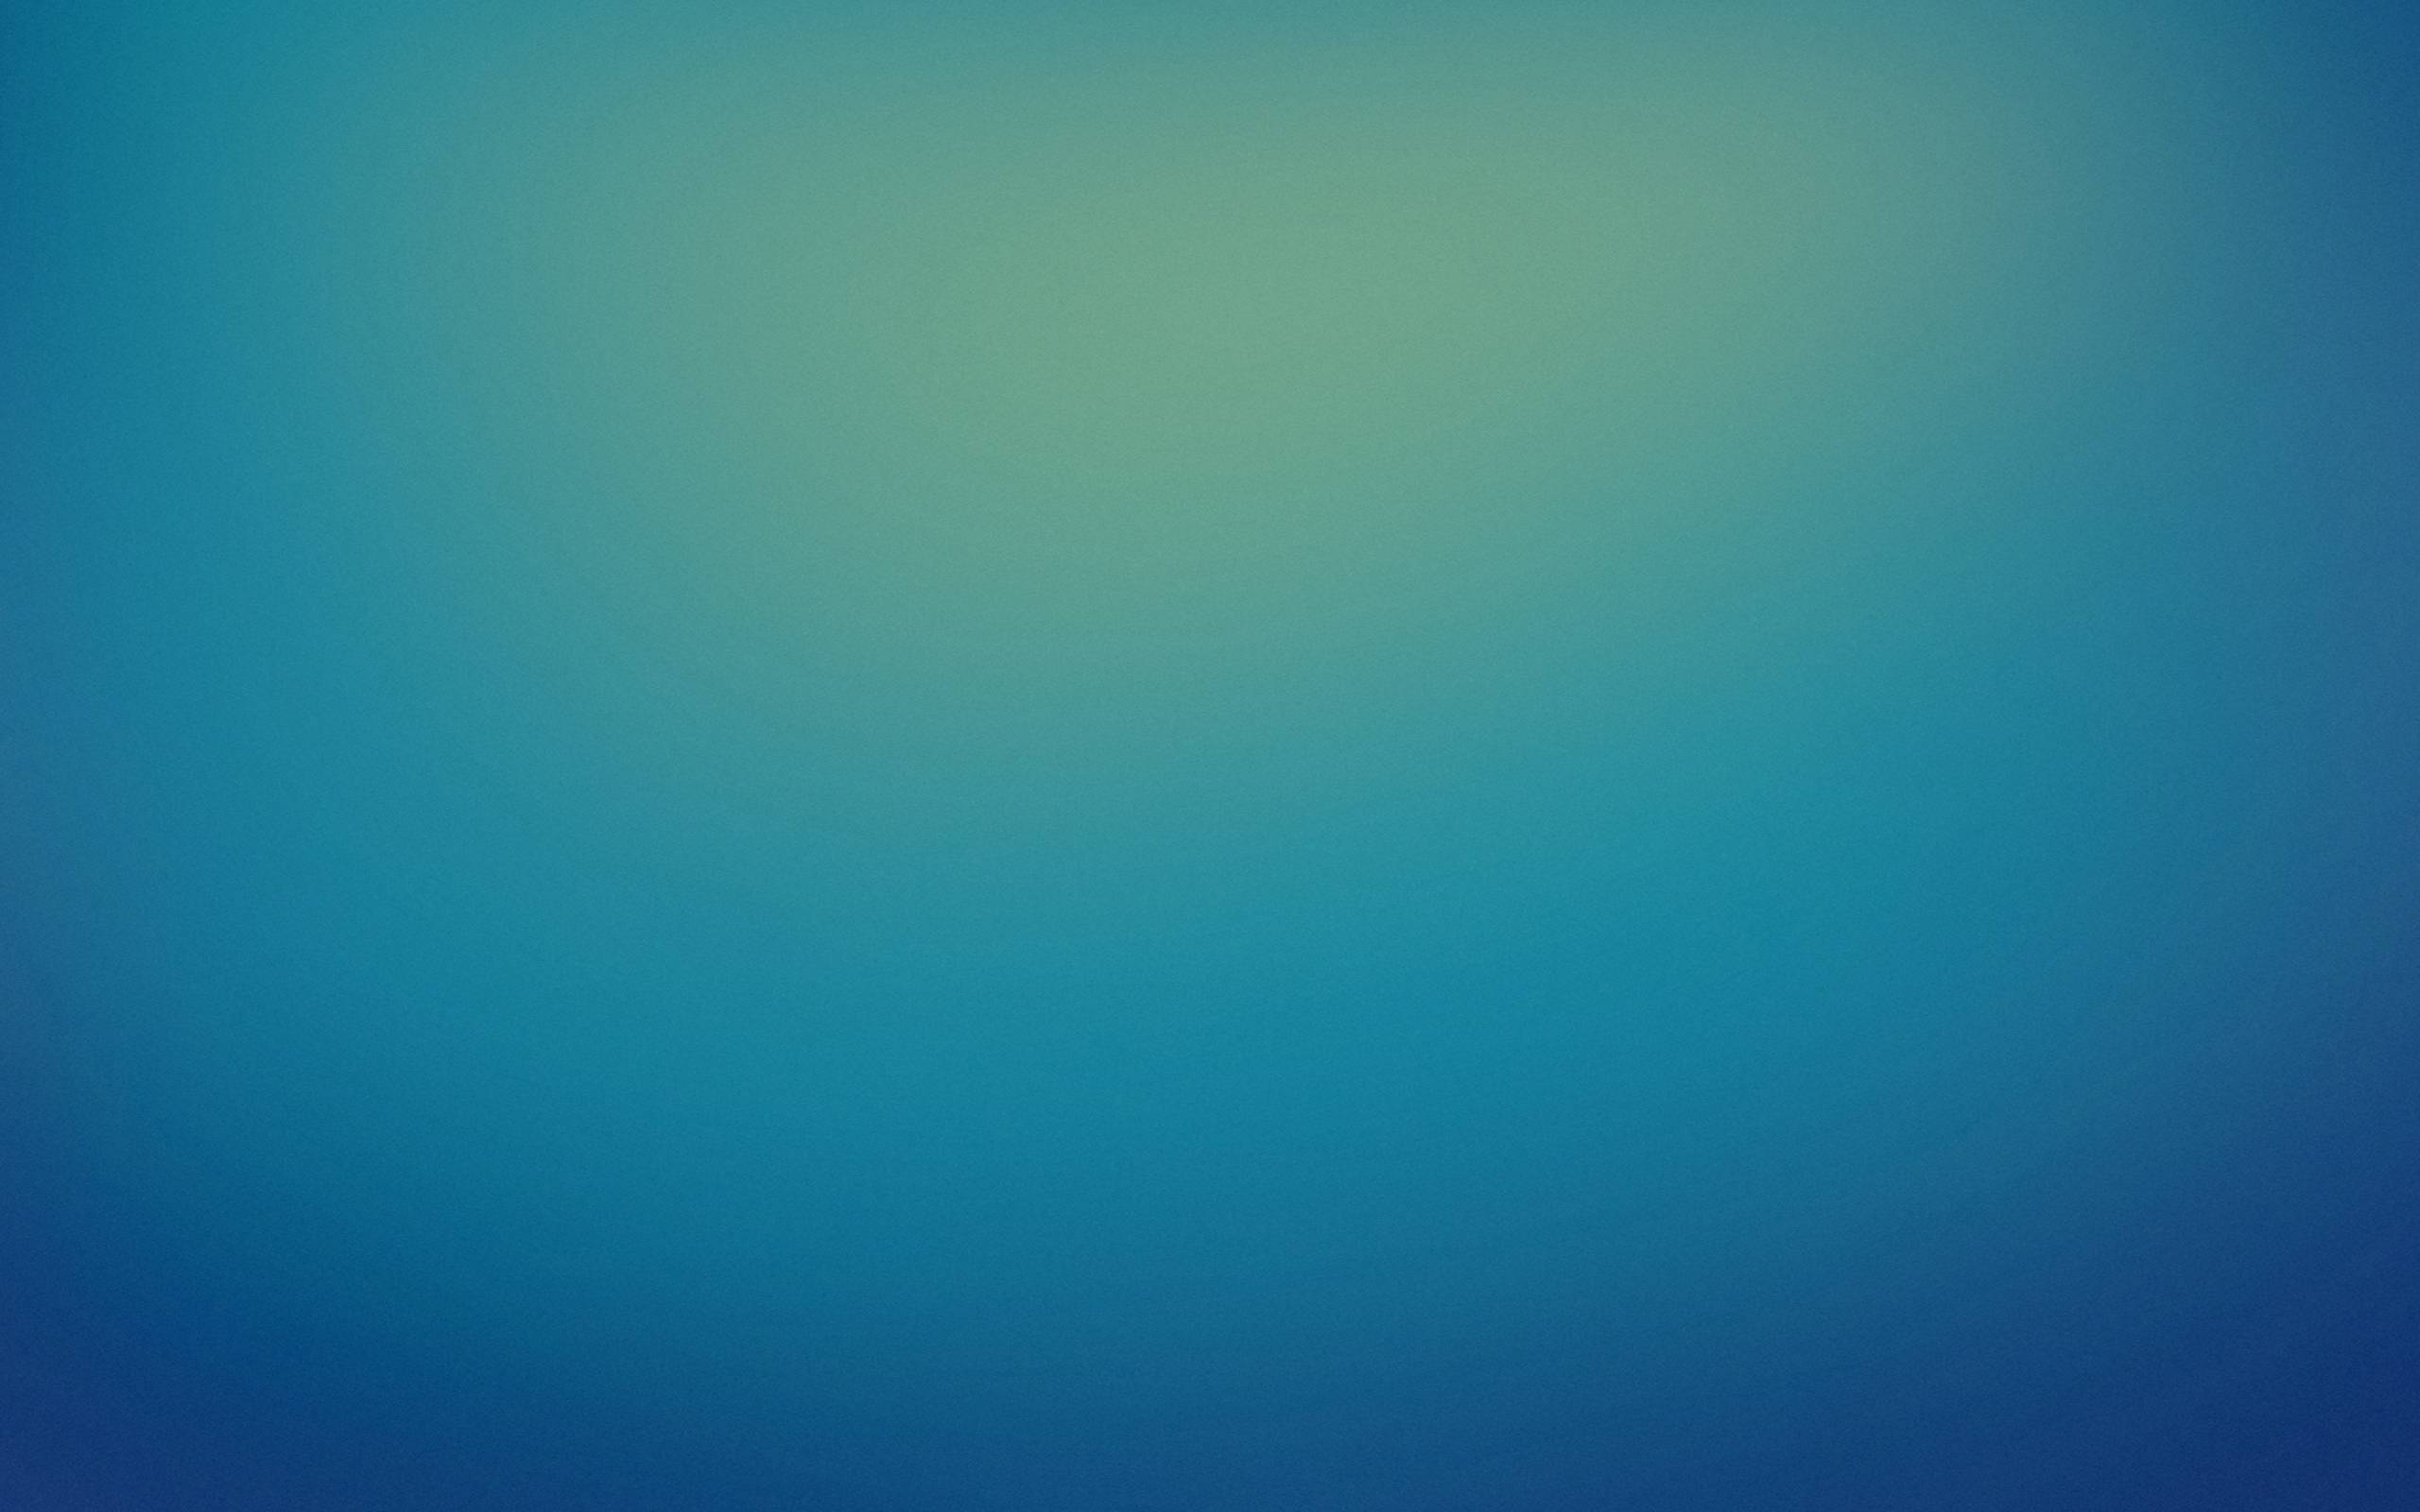 Blue Background Images  Free iPhone  Zoom HD Wallpapers  Vectors   rawpixel